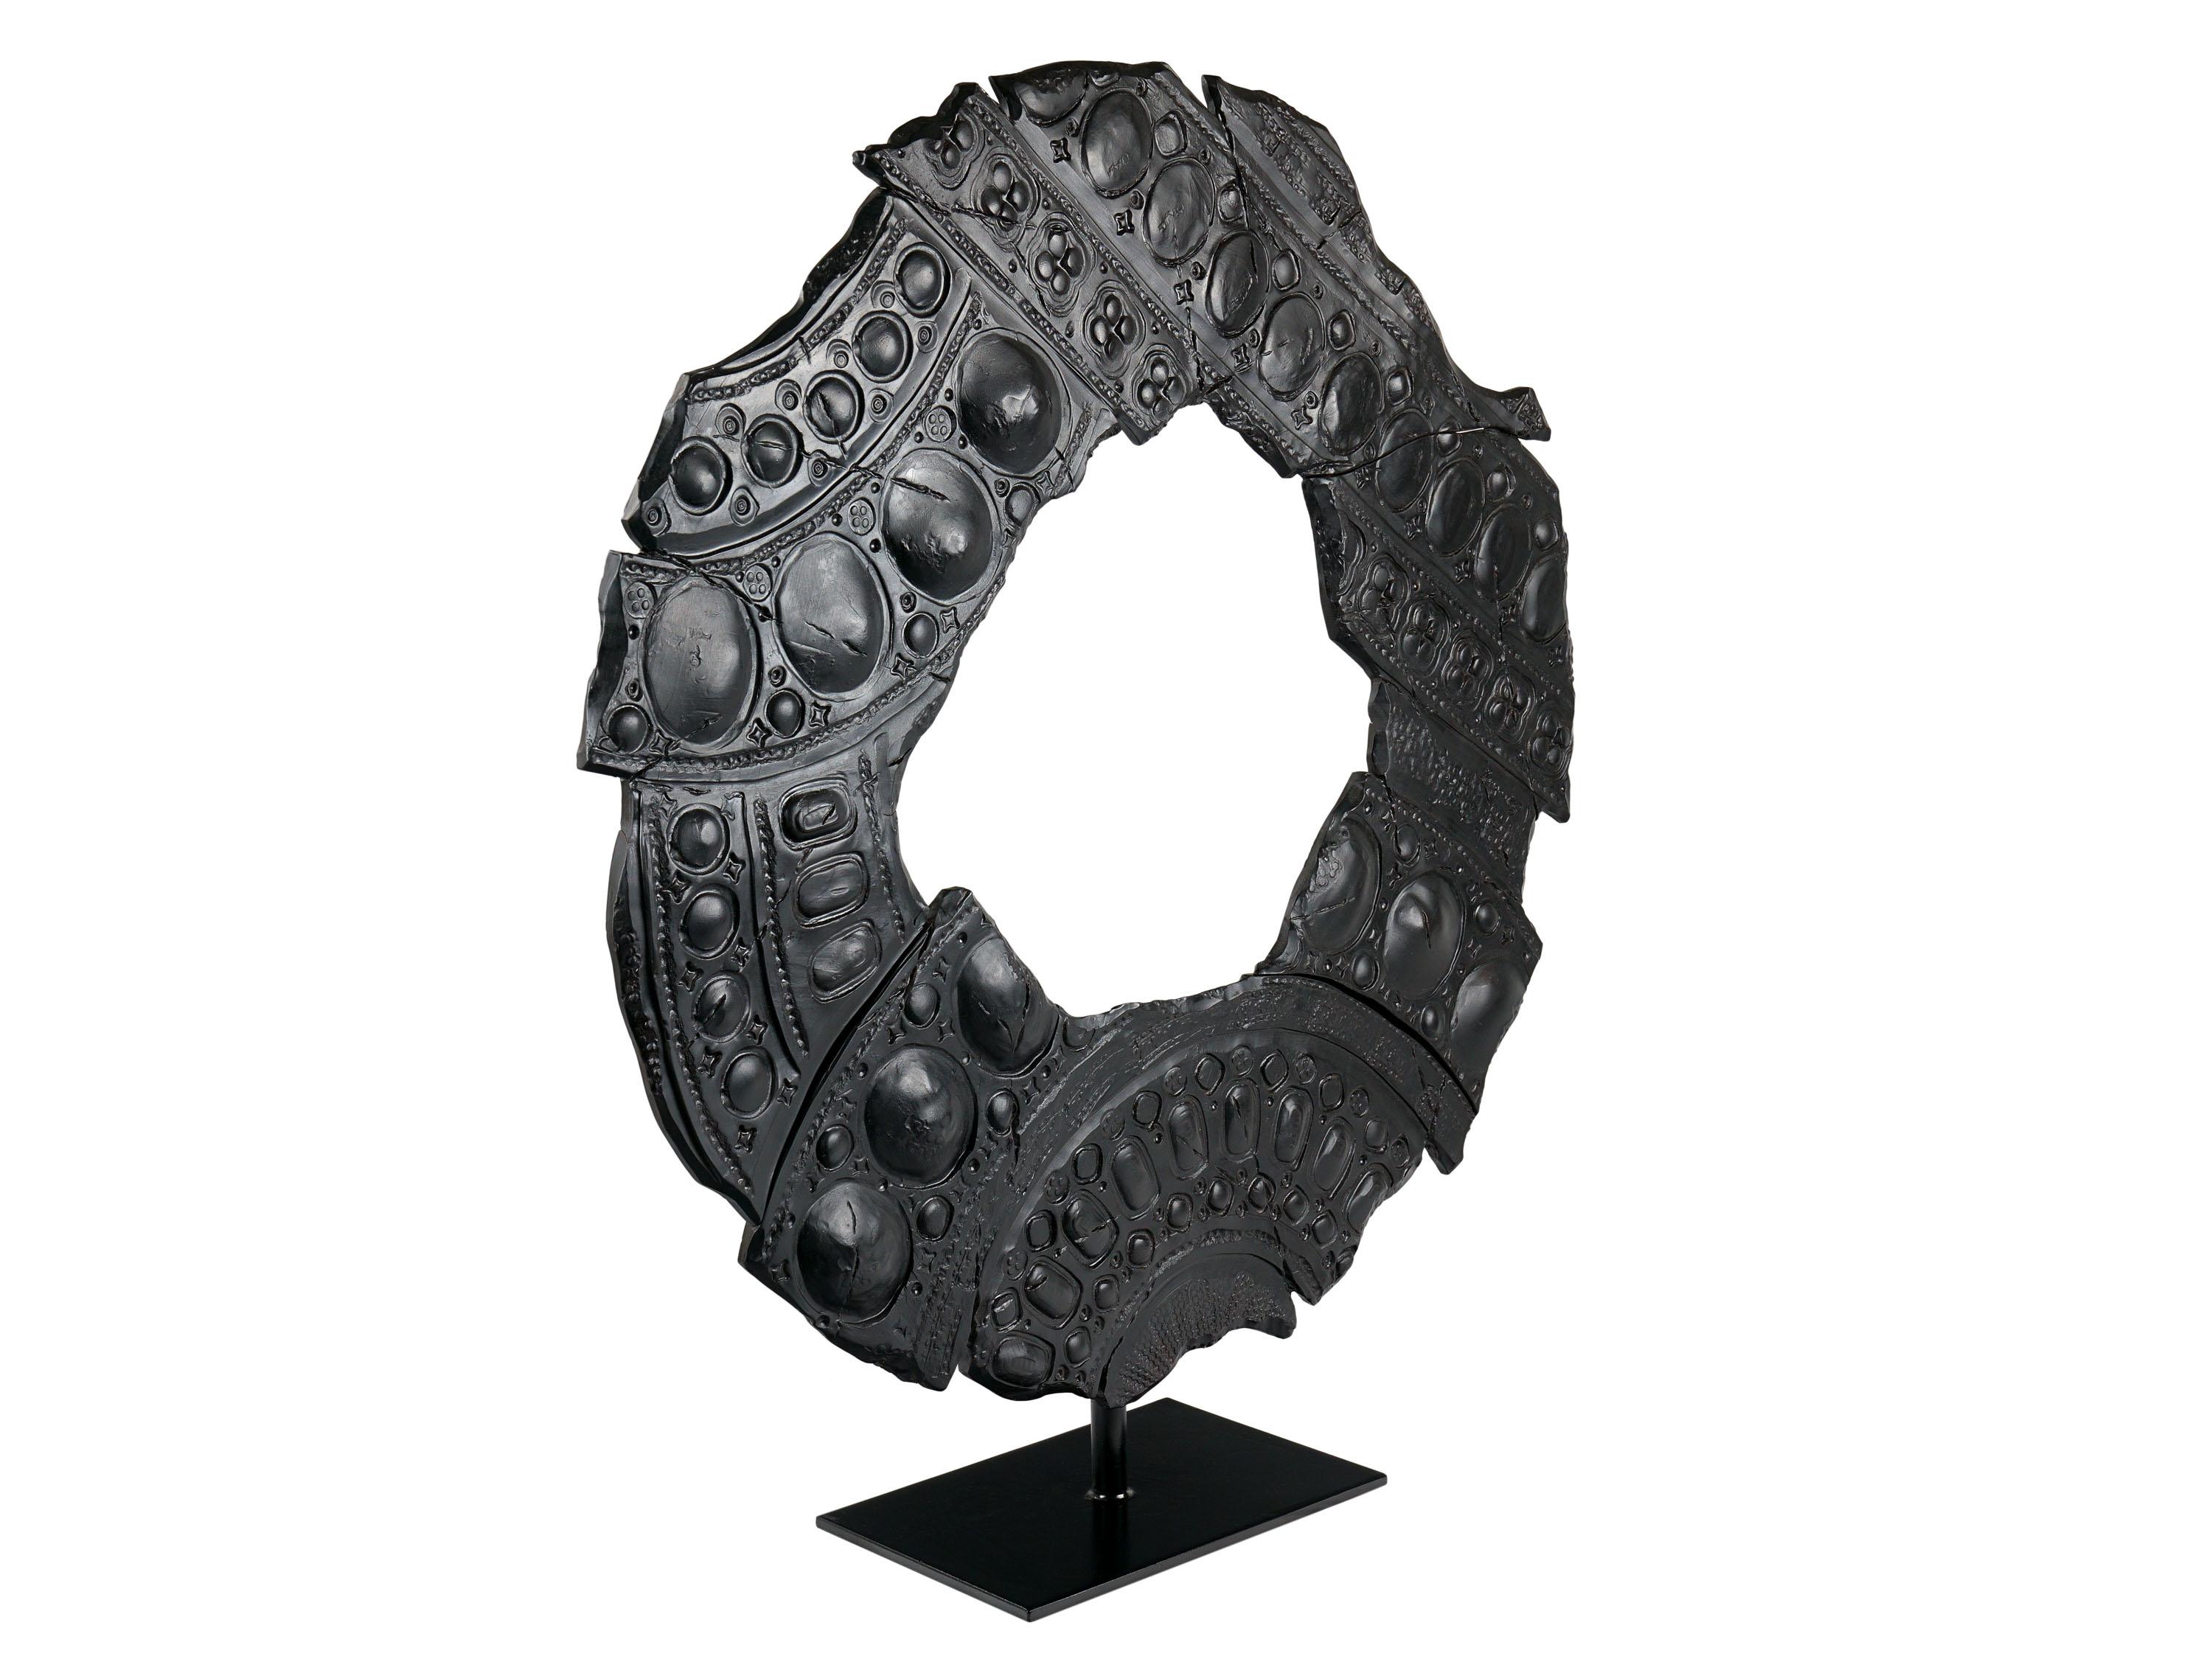 Matt black glazed ceramic sculpture, handmade in Italy by the artist G.Mengoni. The sculpture is mounted on a black painted wooden panel fixed to an adjustable black painted metal pedestal. Upon request, we can remove the easel and make the